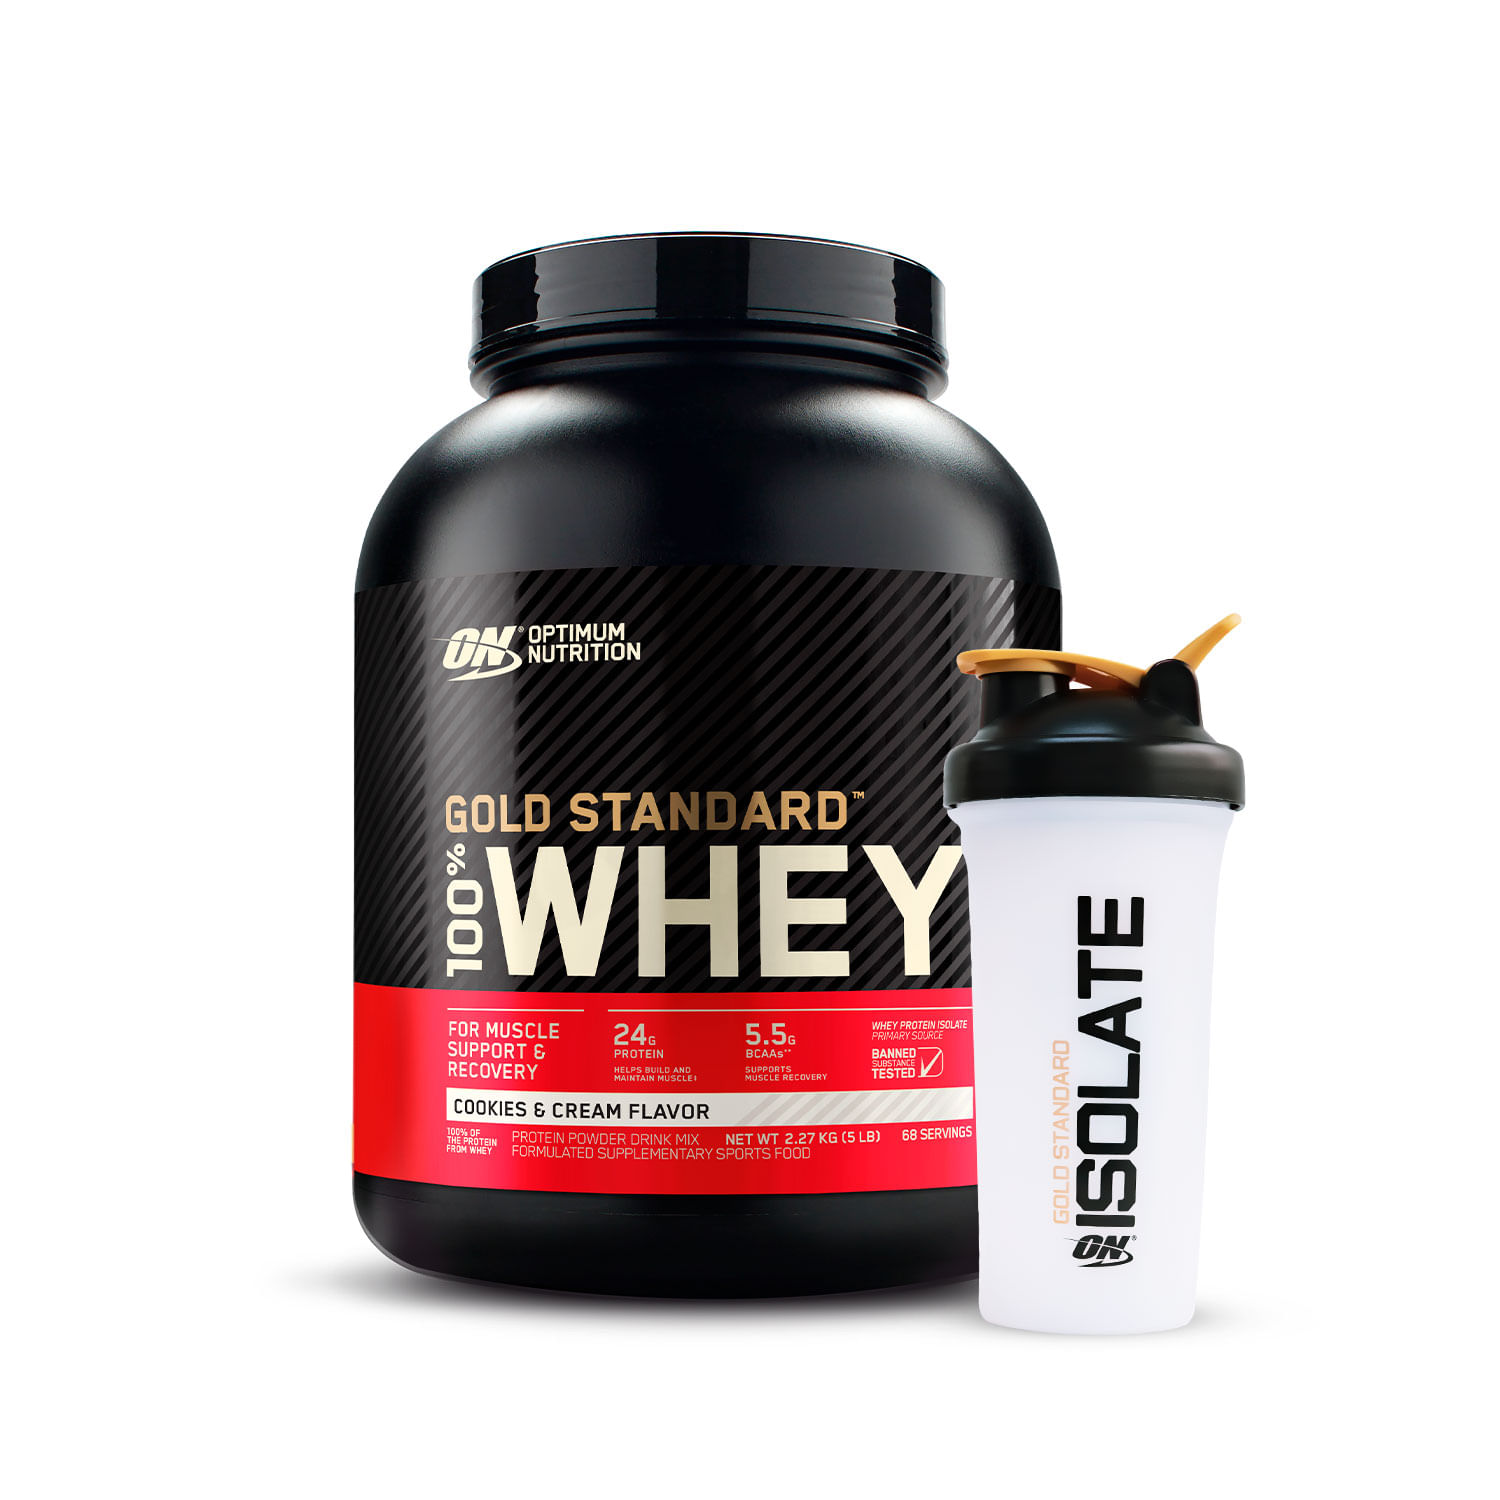 Proteina Gold Standard Whey Optimum Nutrition 5 LB Cookies and Cream con Shaker Gratis